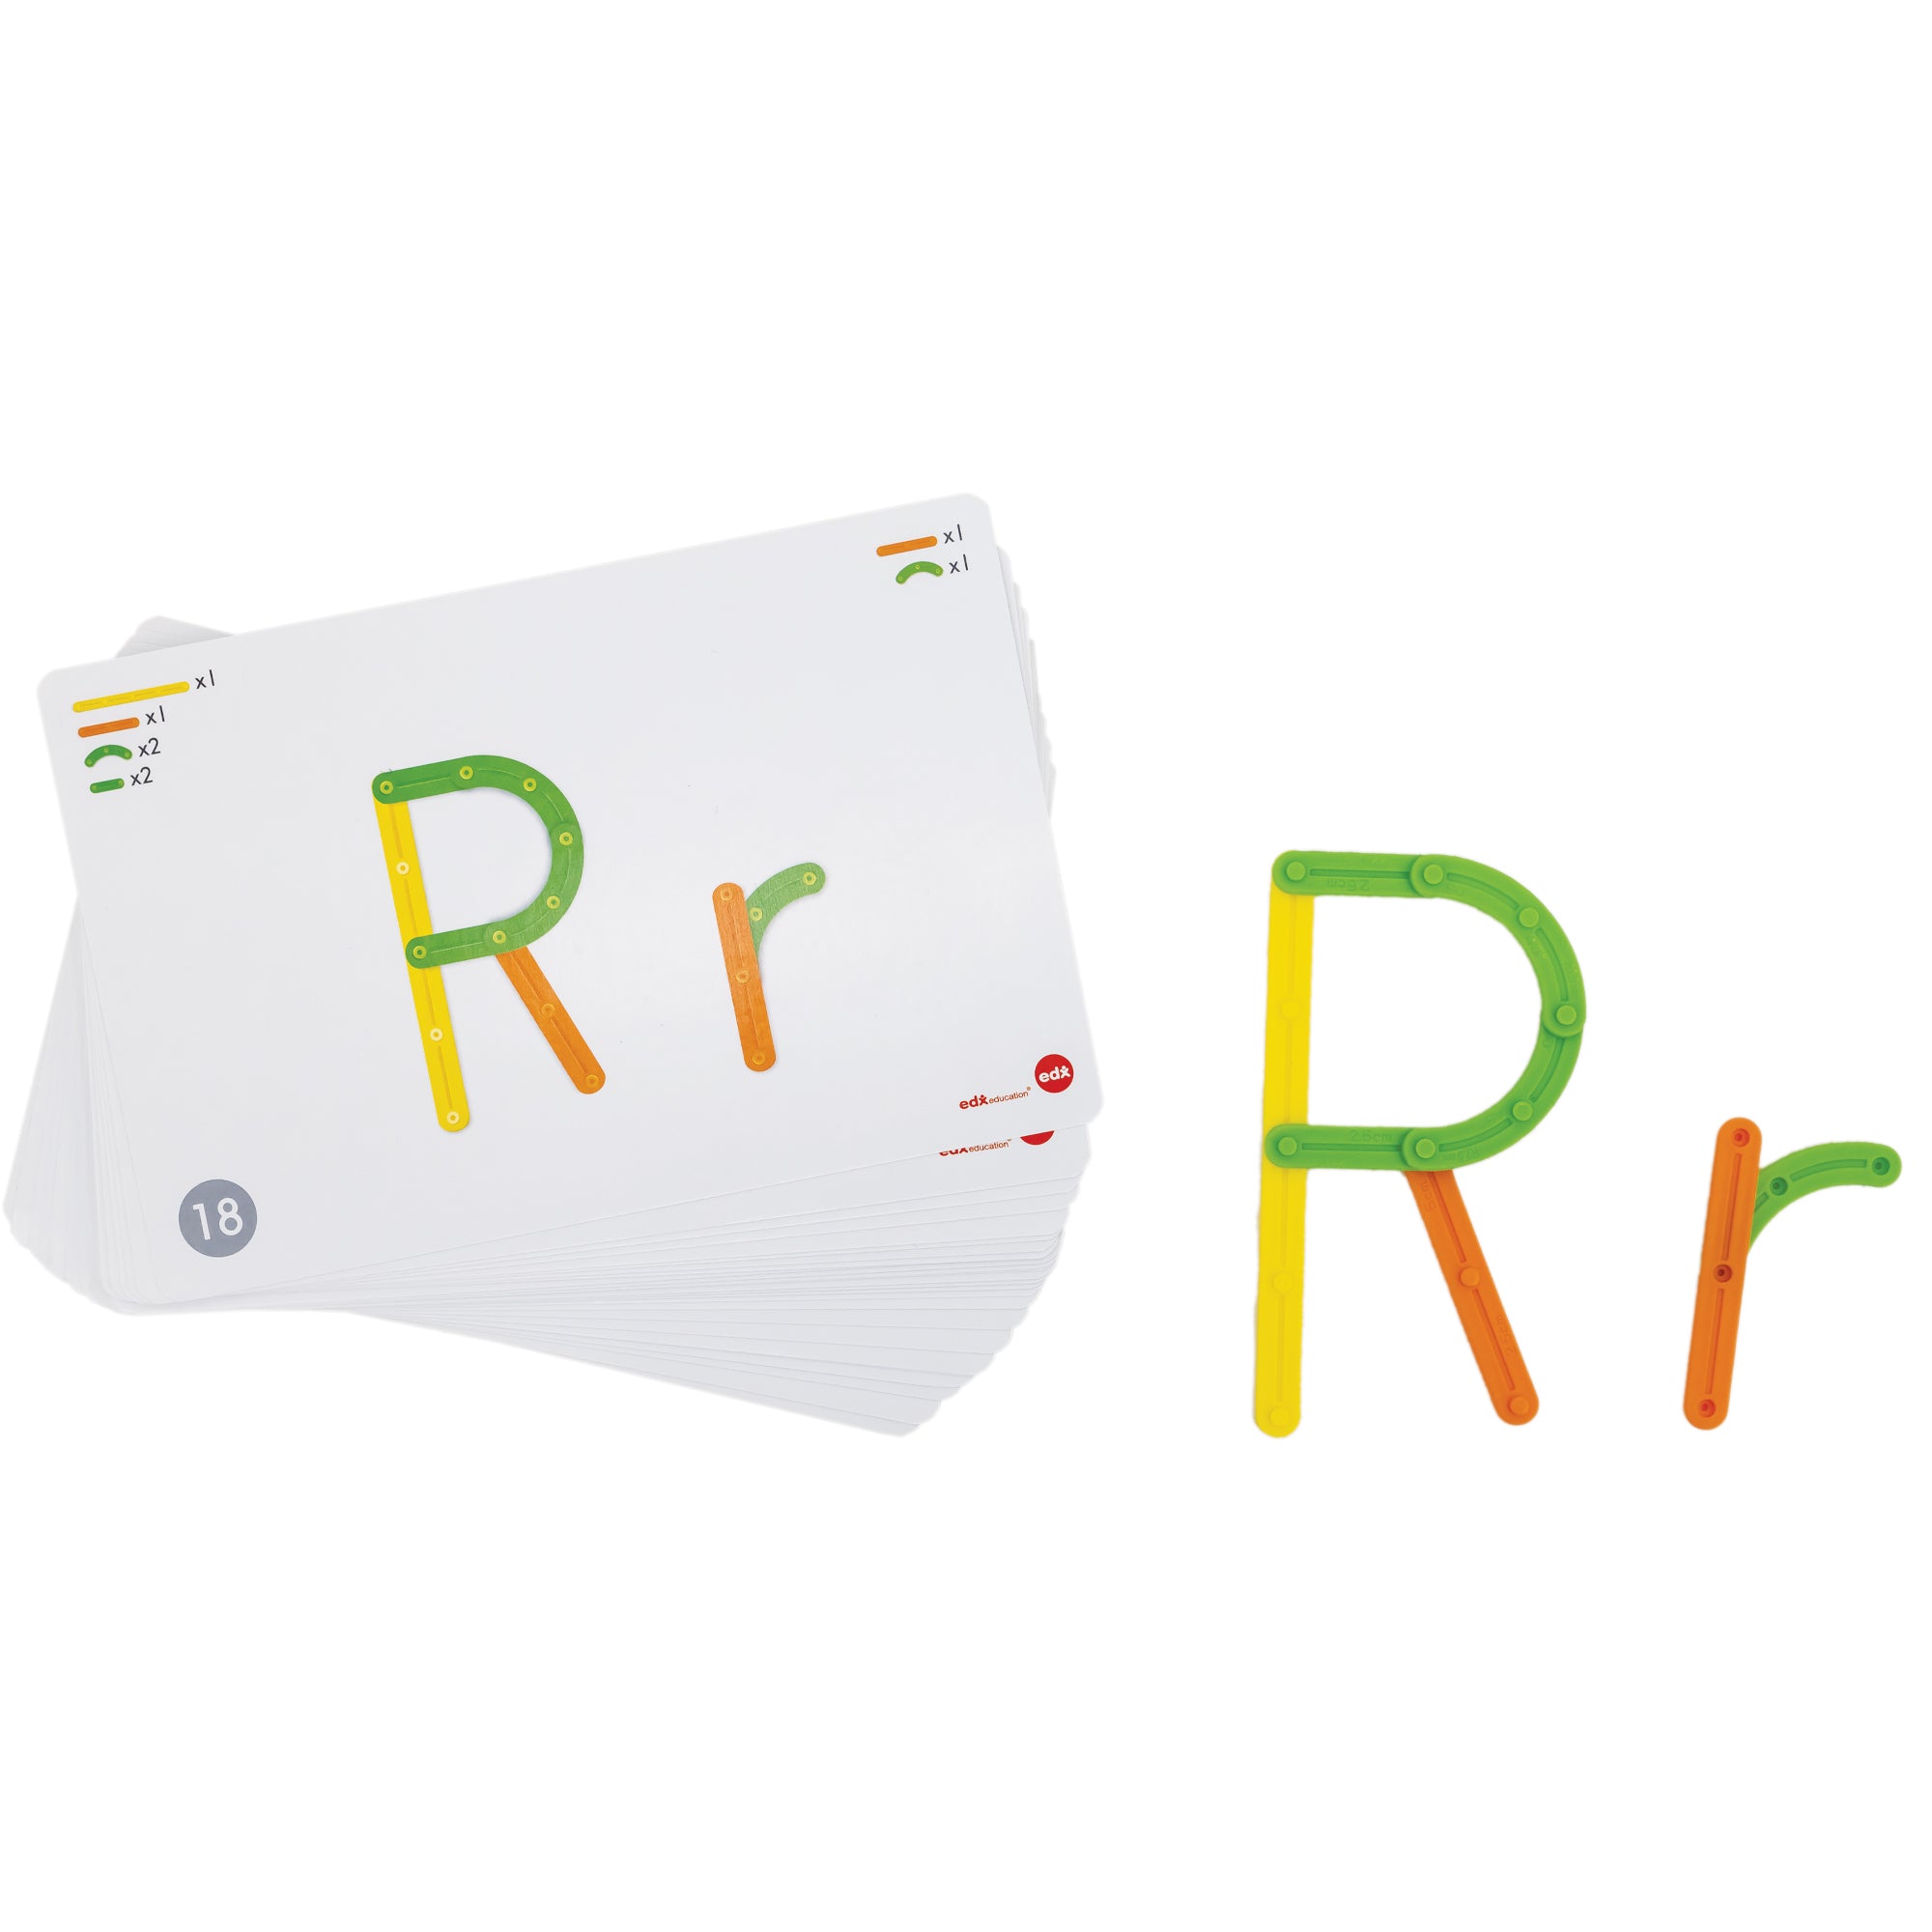 GeoStix Letter Construction activity cards stacked on the left showing a capital and lowercase R. On the right are the capital and lowercase R’s created with the GeoStix pieces. The straight and curved pieces that make up the letters are green, yellow, and orange. The straight and curved pieces are in many colors and snapped together to create the shapes.